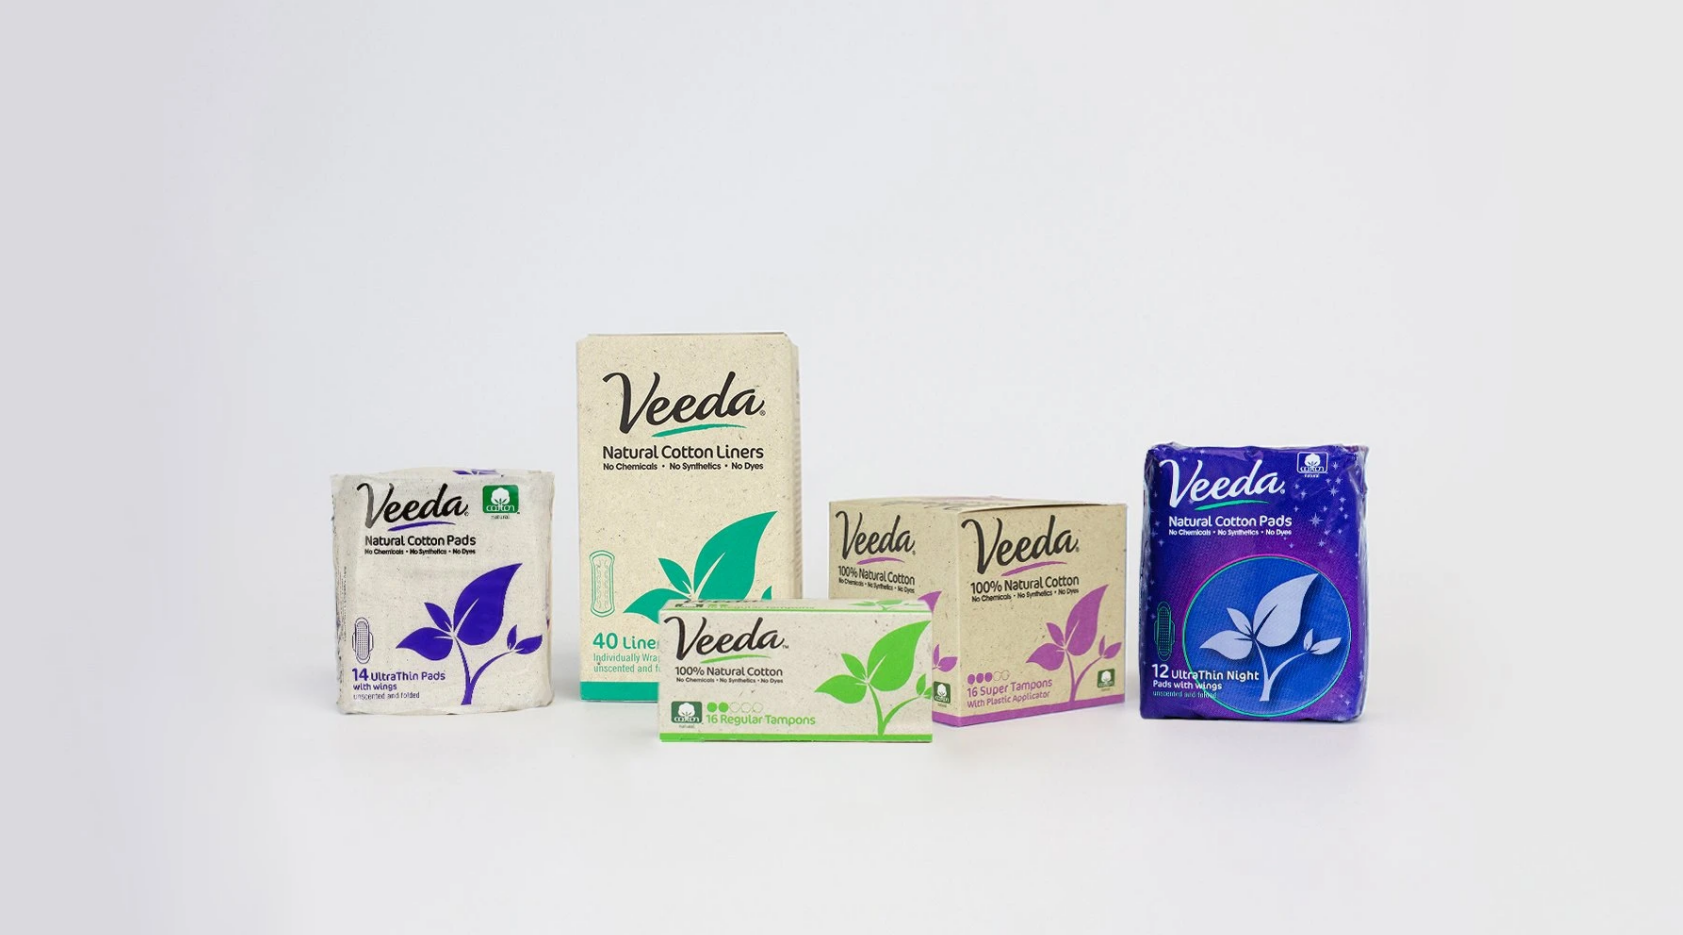 Veeda Natural Period Care Products